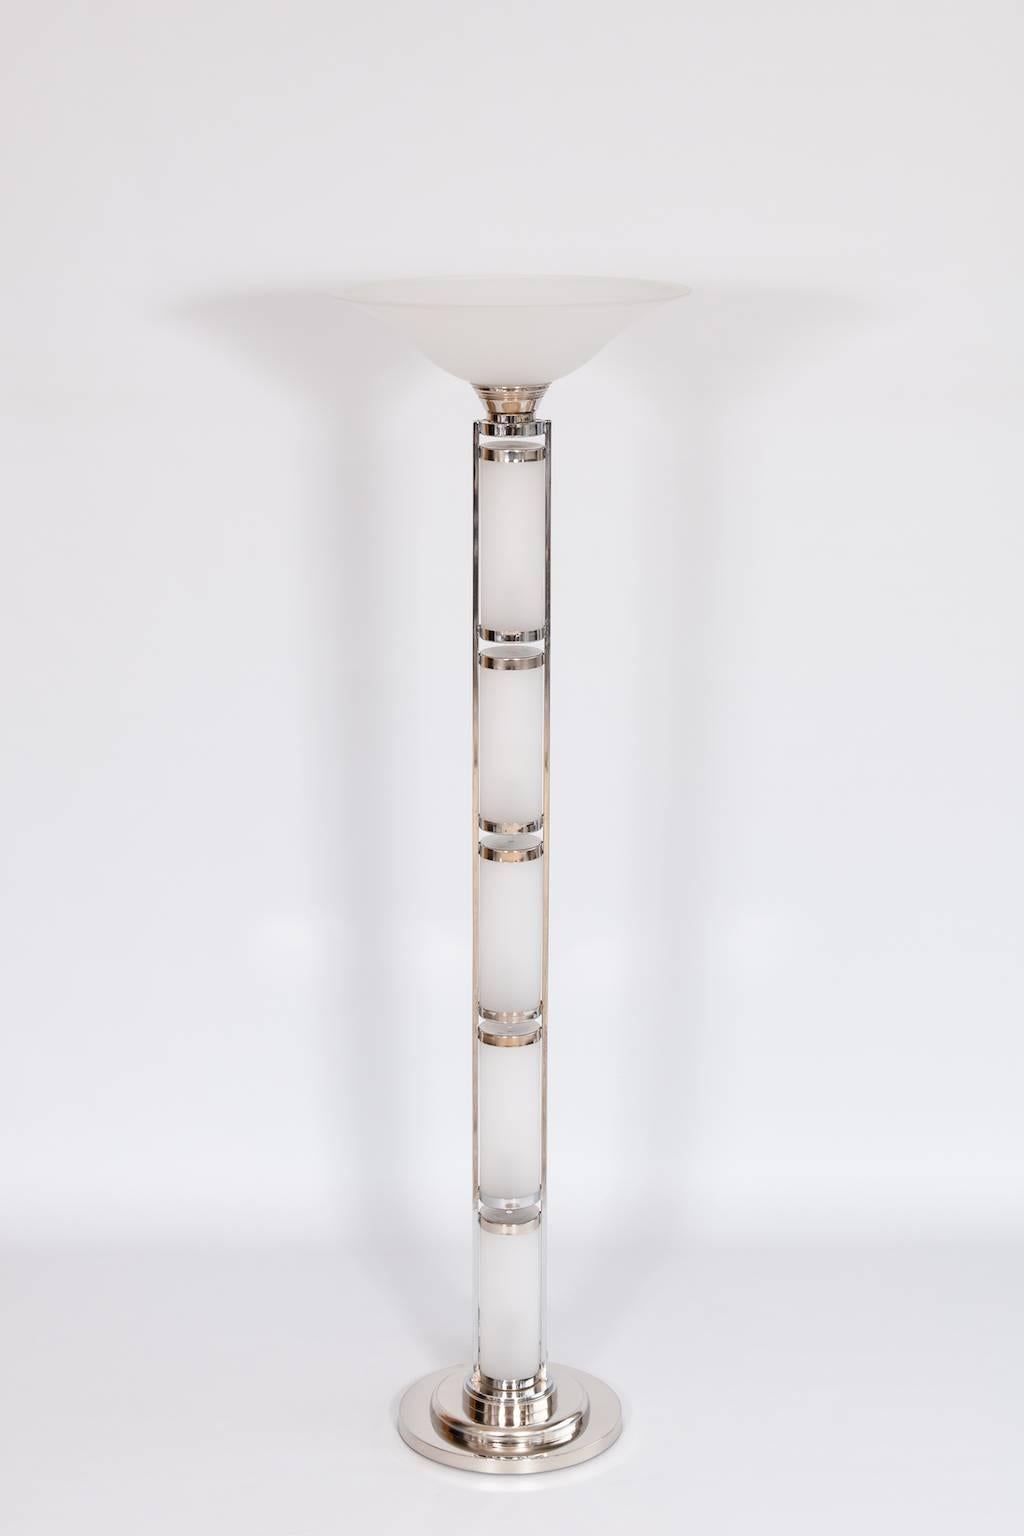 Elegant Italian Sandblasted Murano Glass Floor Lamp Circa 1970s
This refined floor lamp was entirely handcrafted in the Venetian island of Murano in the 1970s using the ancient local glassmaking techniques. This work of art is made of four glass